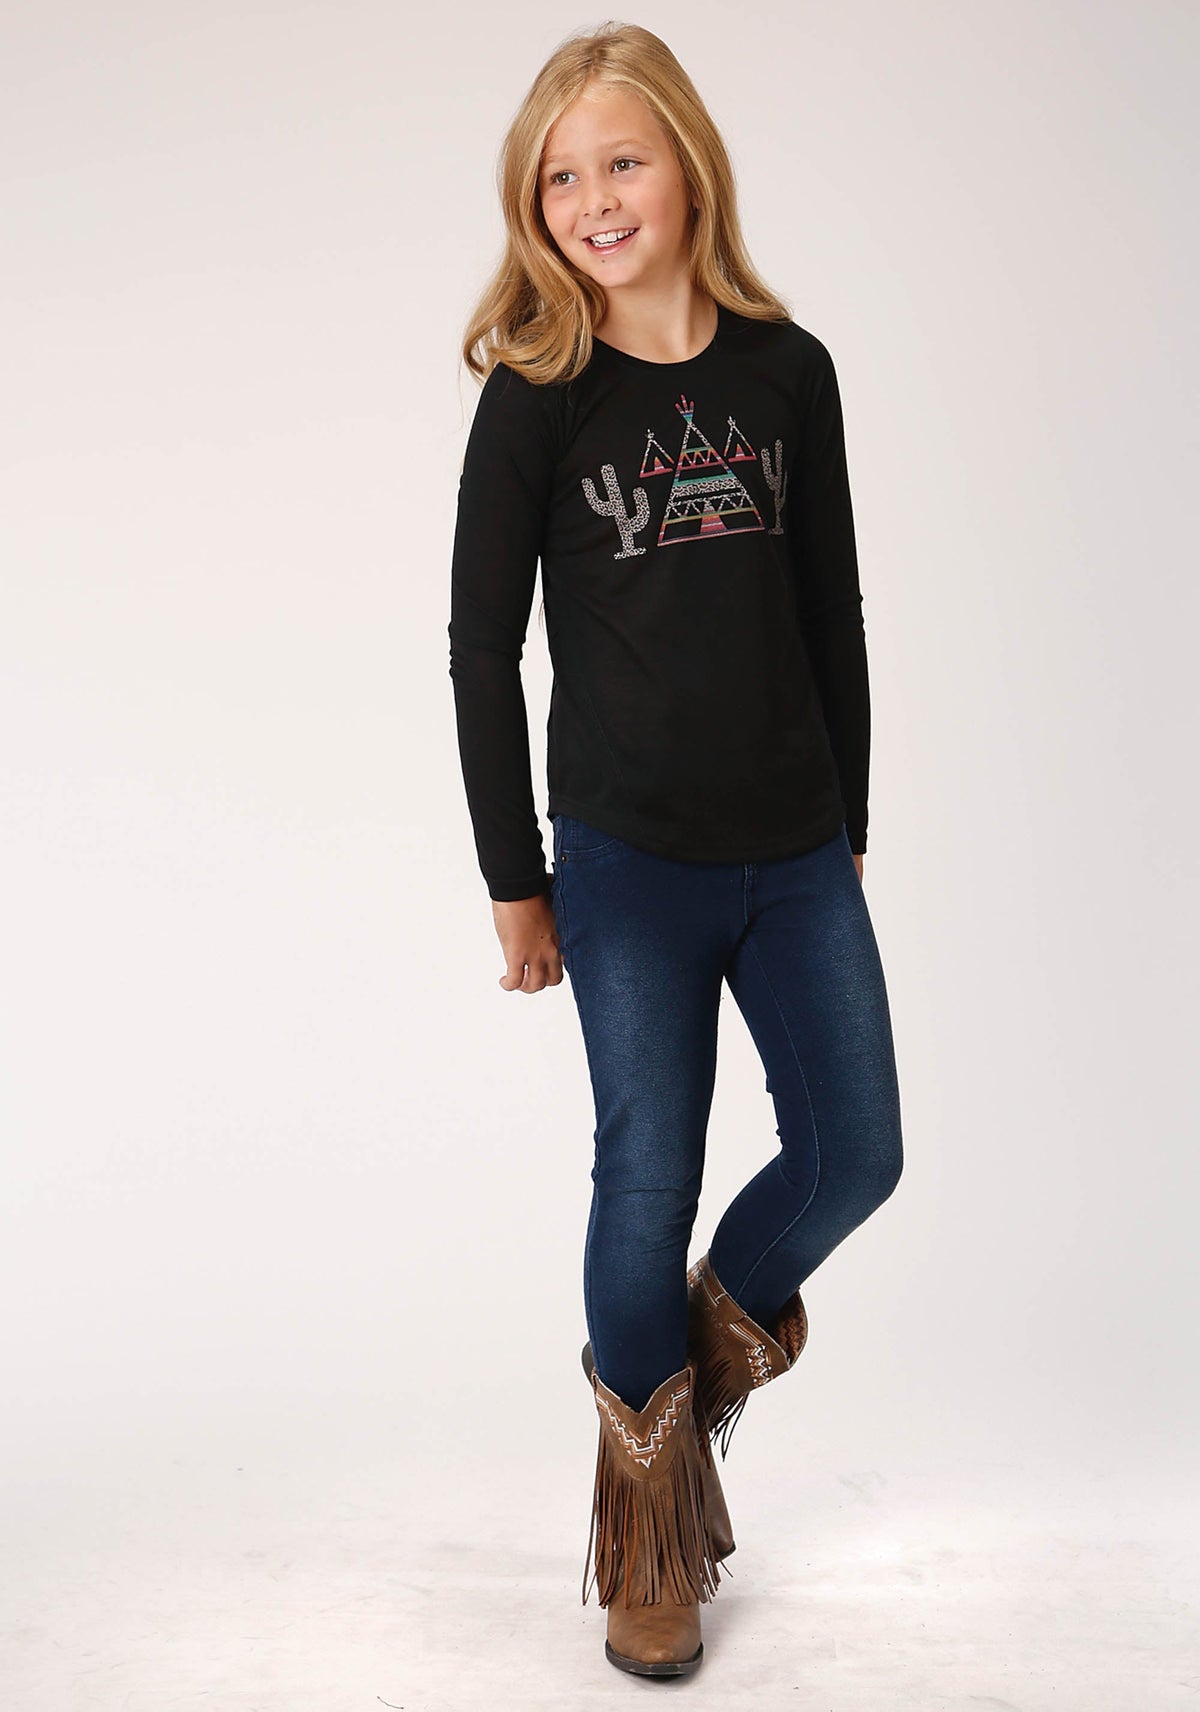 Roper Girls Black With Teepee And Cactus Print Long Sleeve Knit T-Shirt